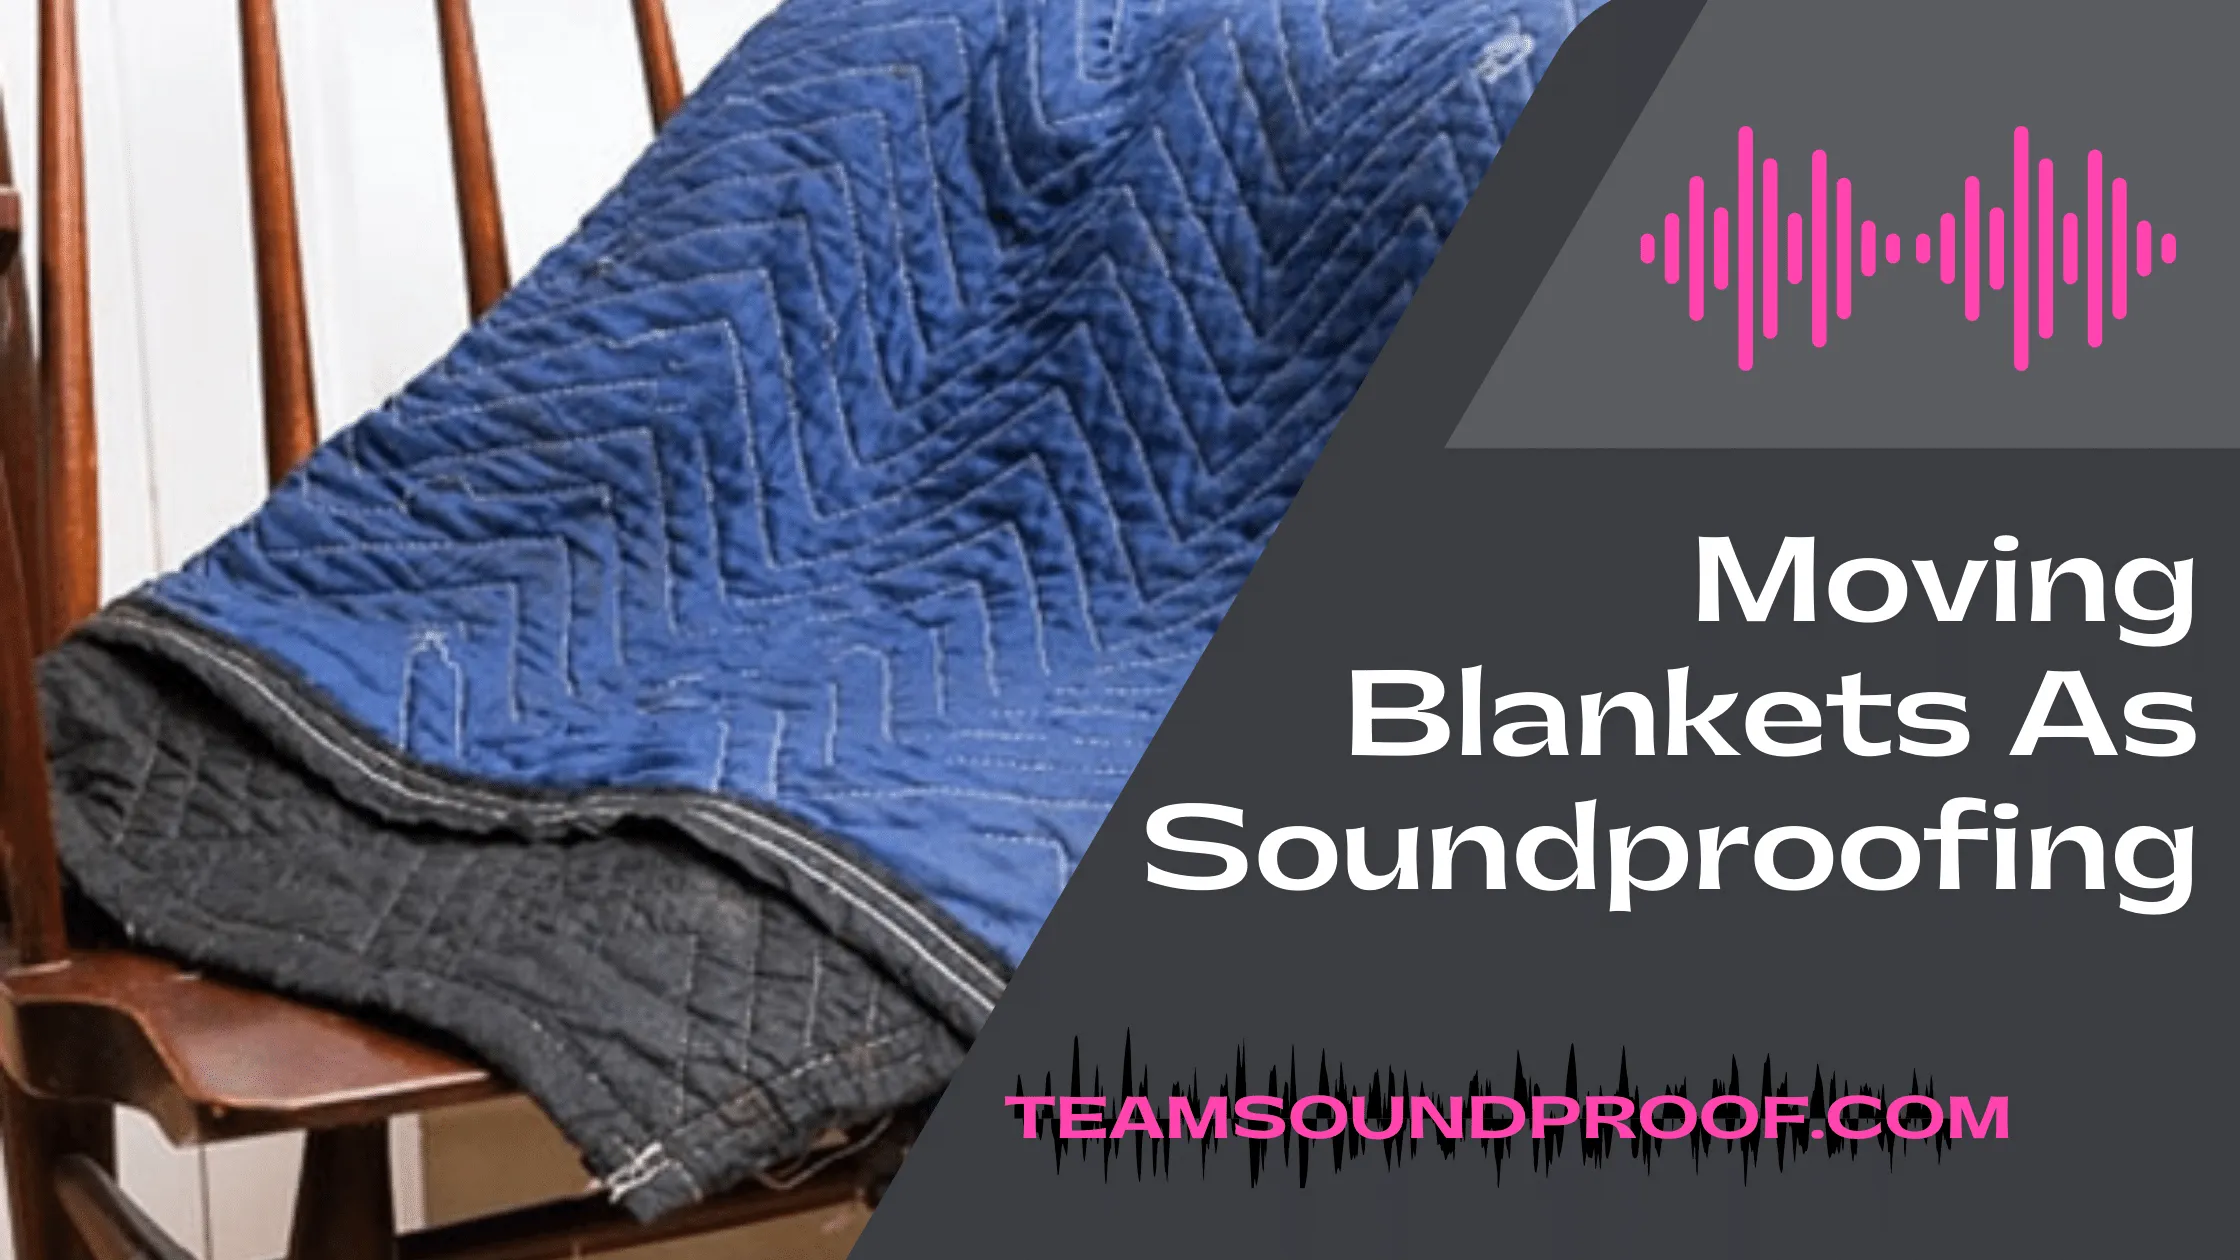 Moving Blankets As Soundproofing - Quick Guide